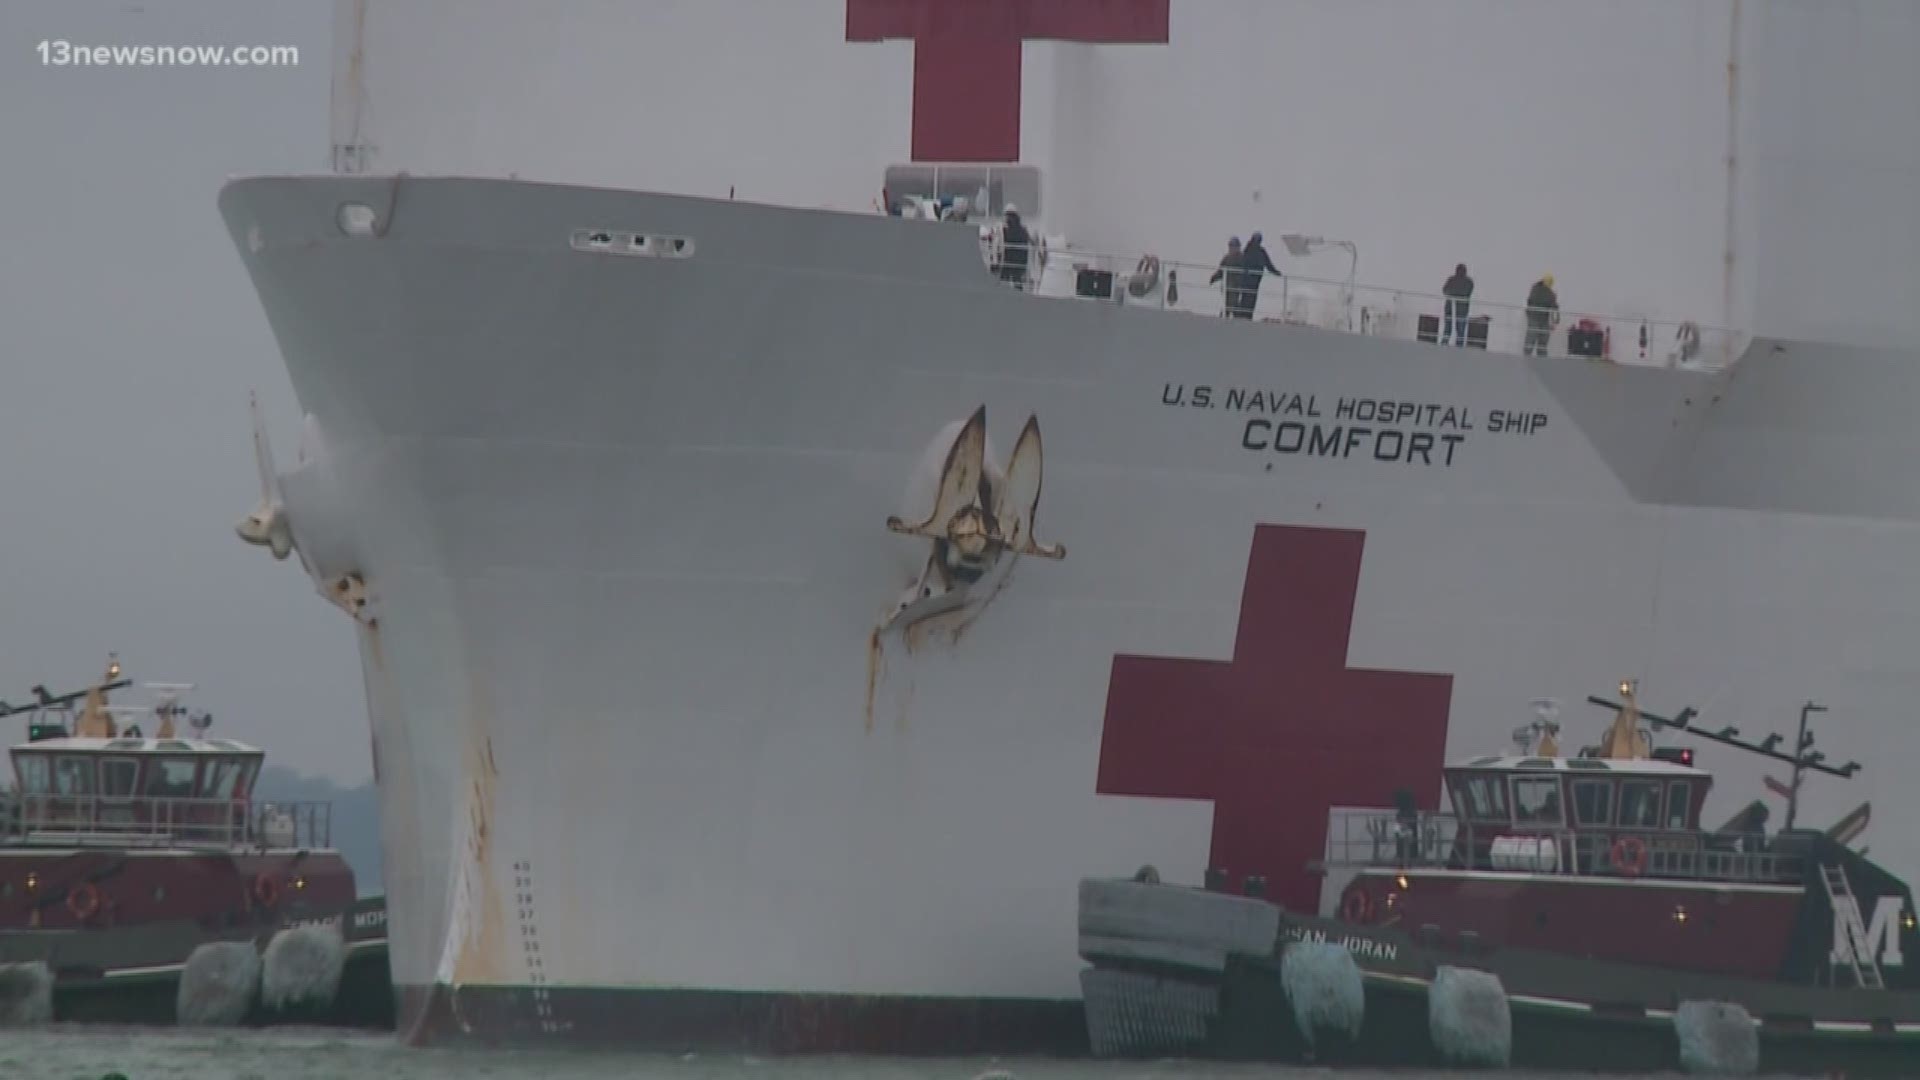 Could the military deploy hospital ships such as USNS Comfort?